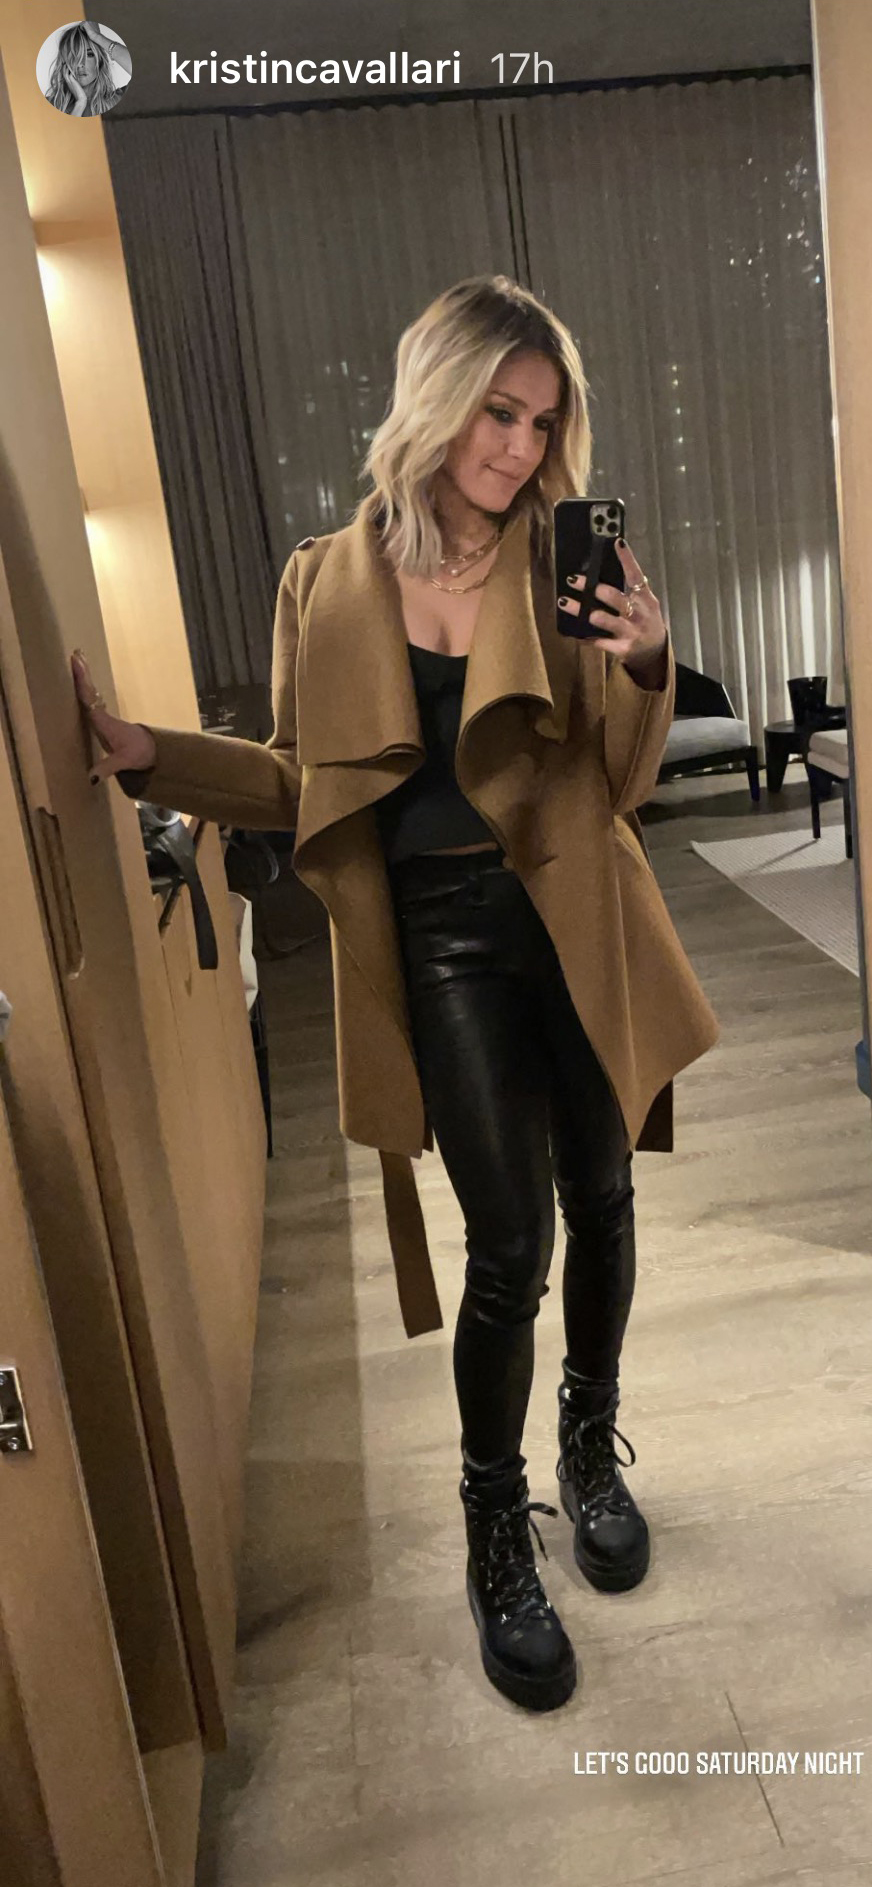 Channel Kristin Cavallari's Winter Style With These Faux Leather